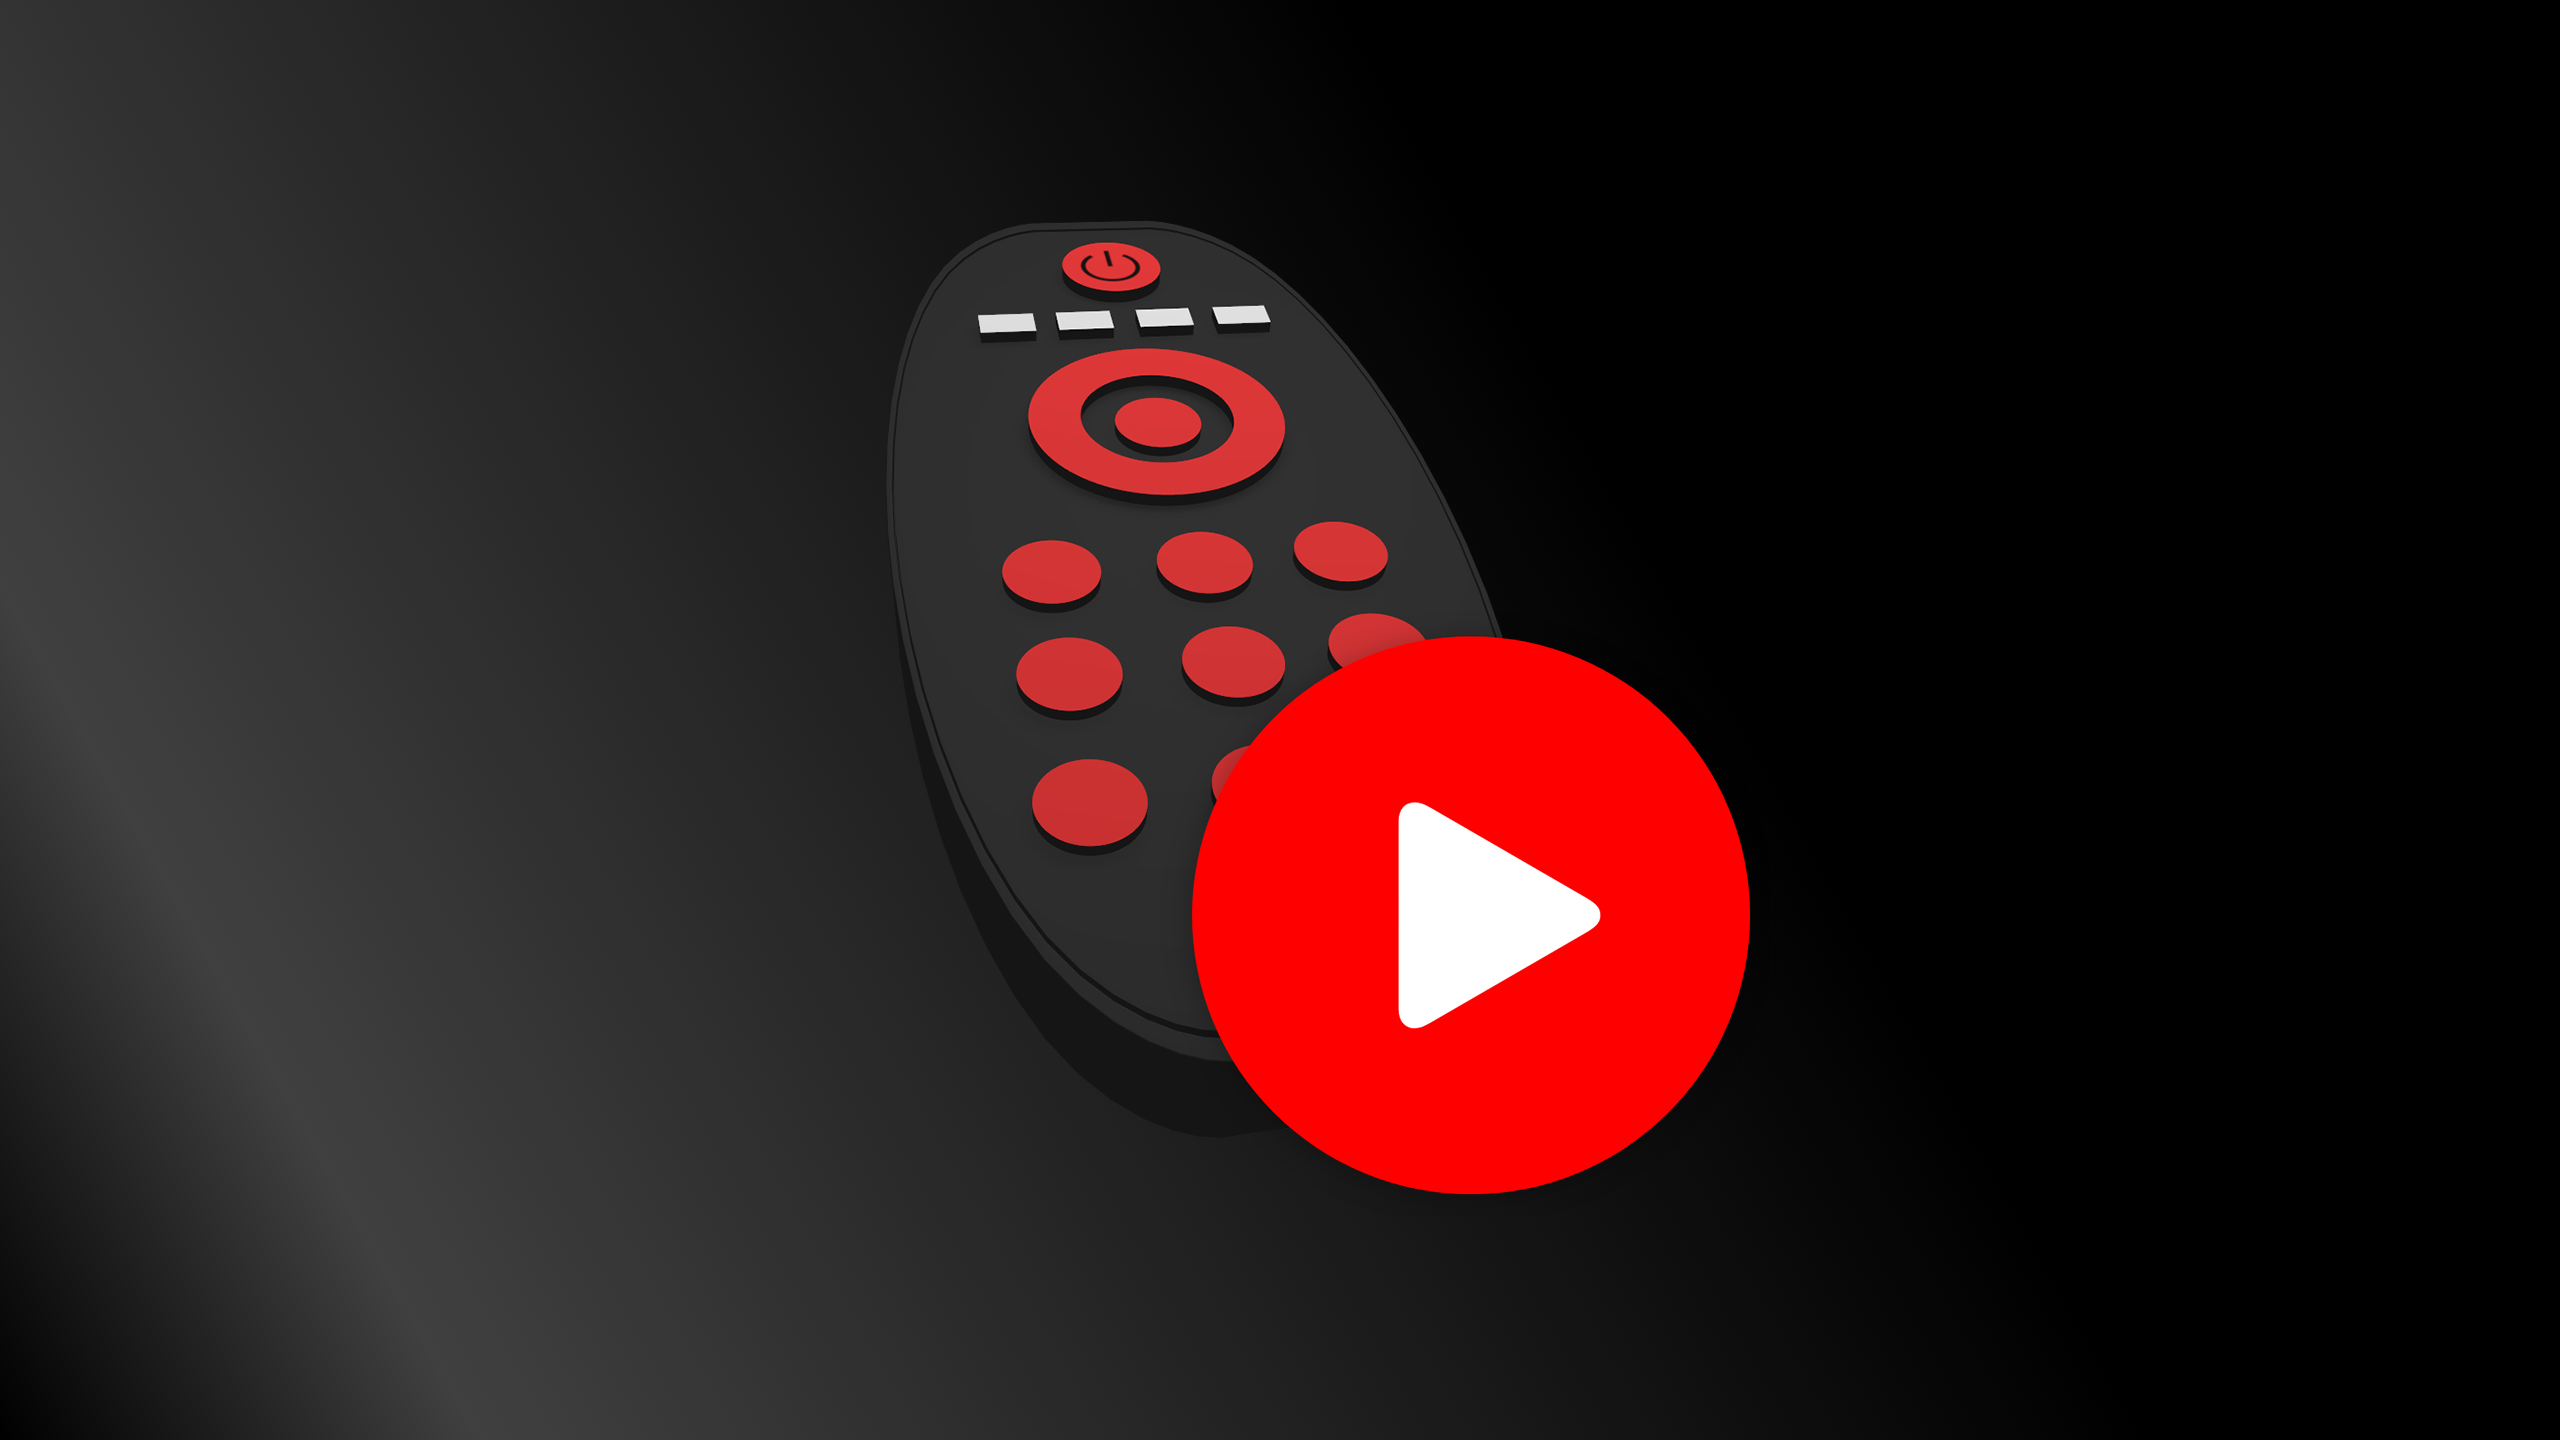 is there a remote for mac that will control youtube